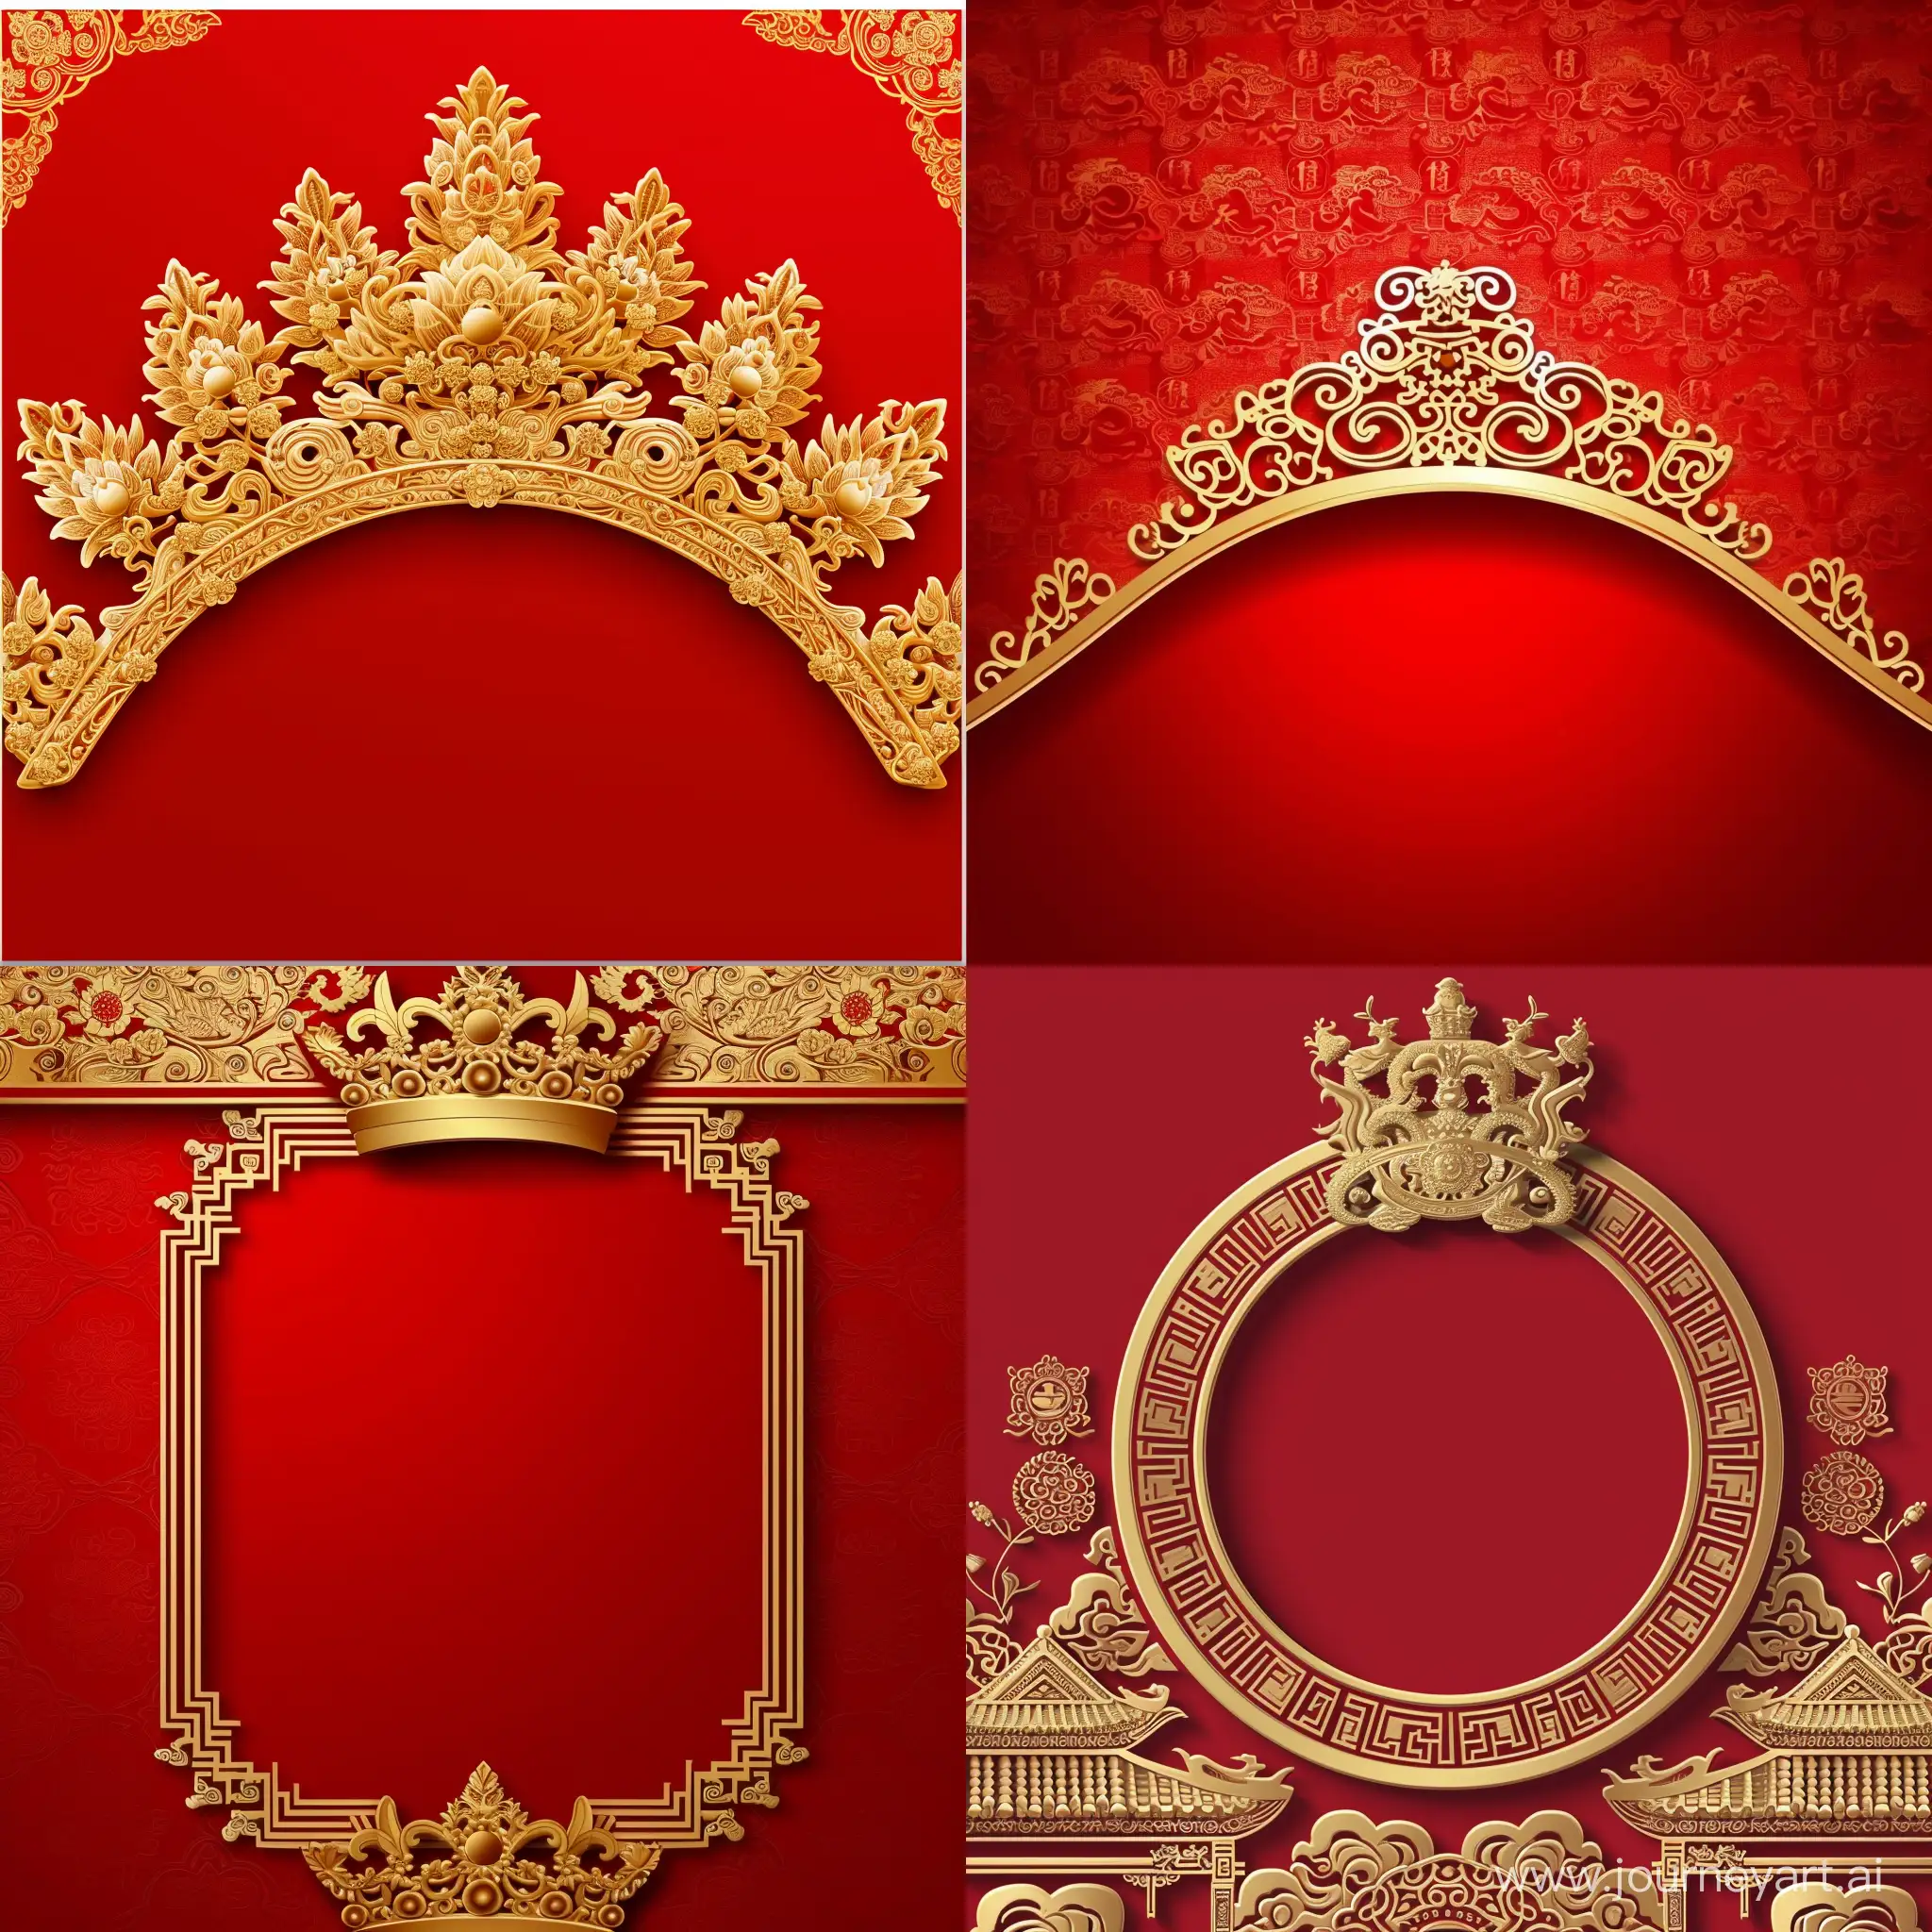 Elegant-Chinese-Gold-Crown-on-Vibrant-Red-Background-Vector